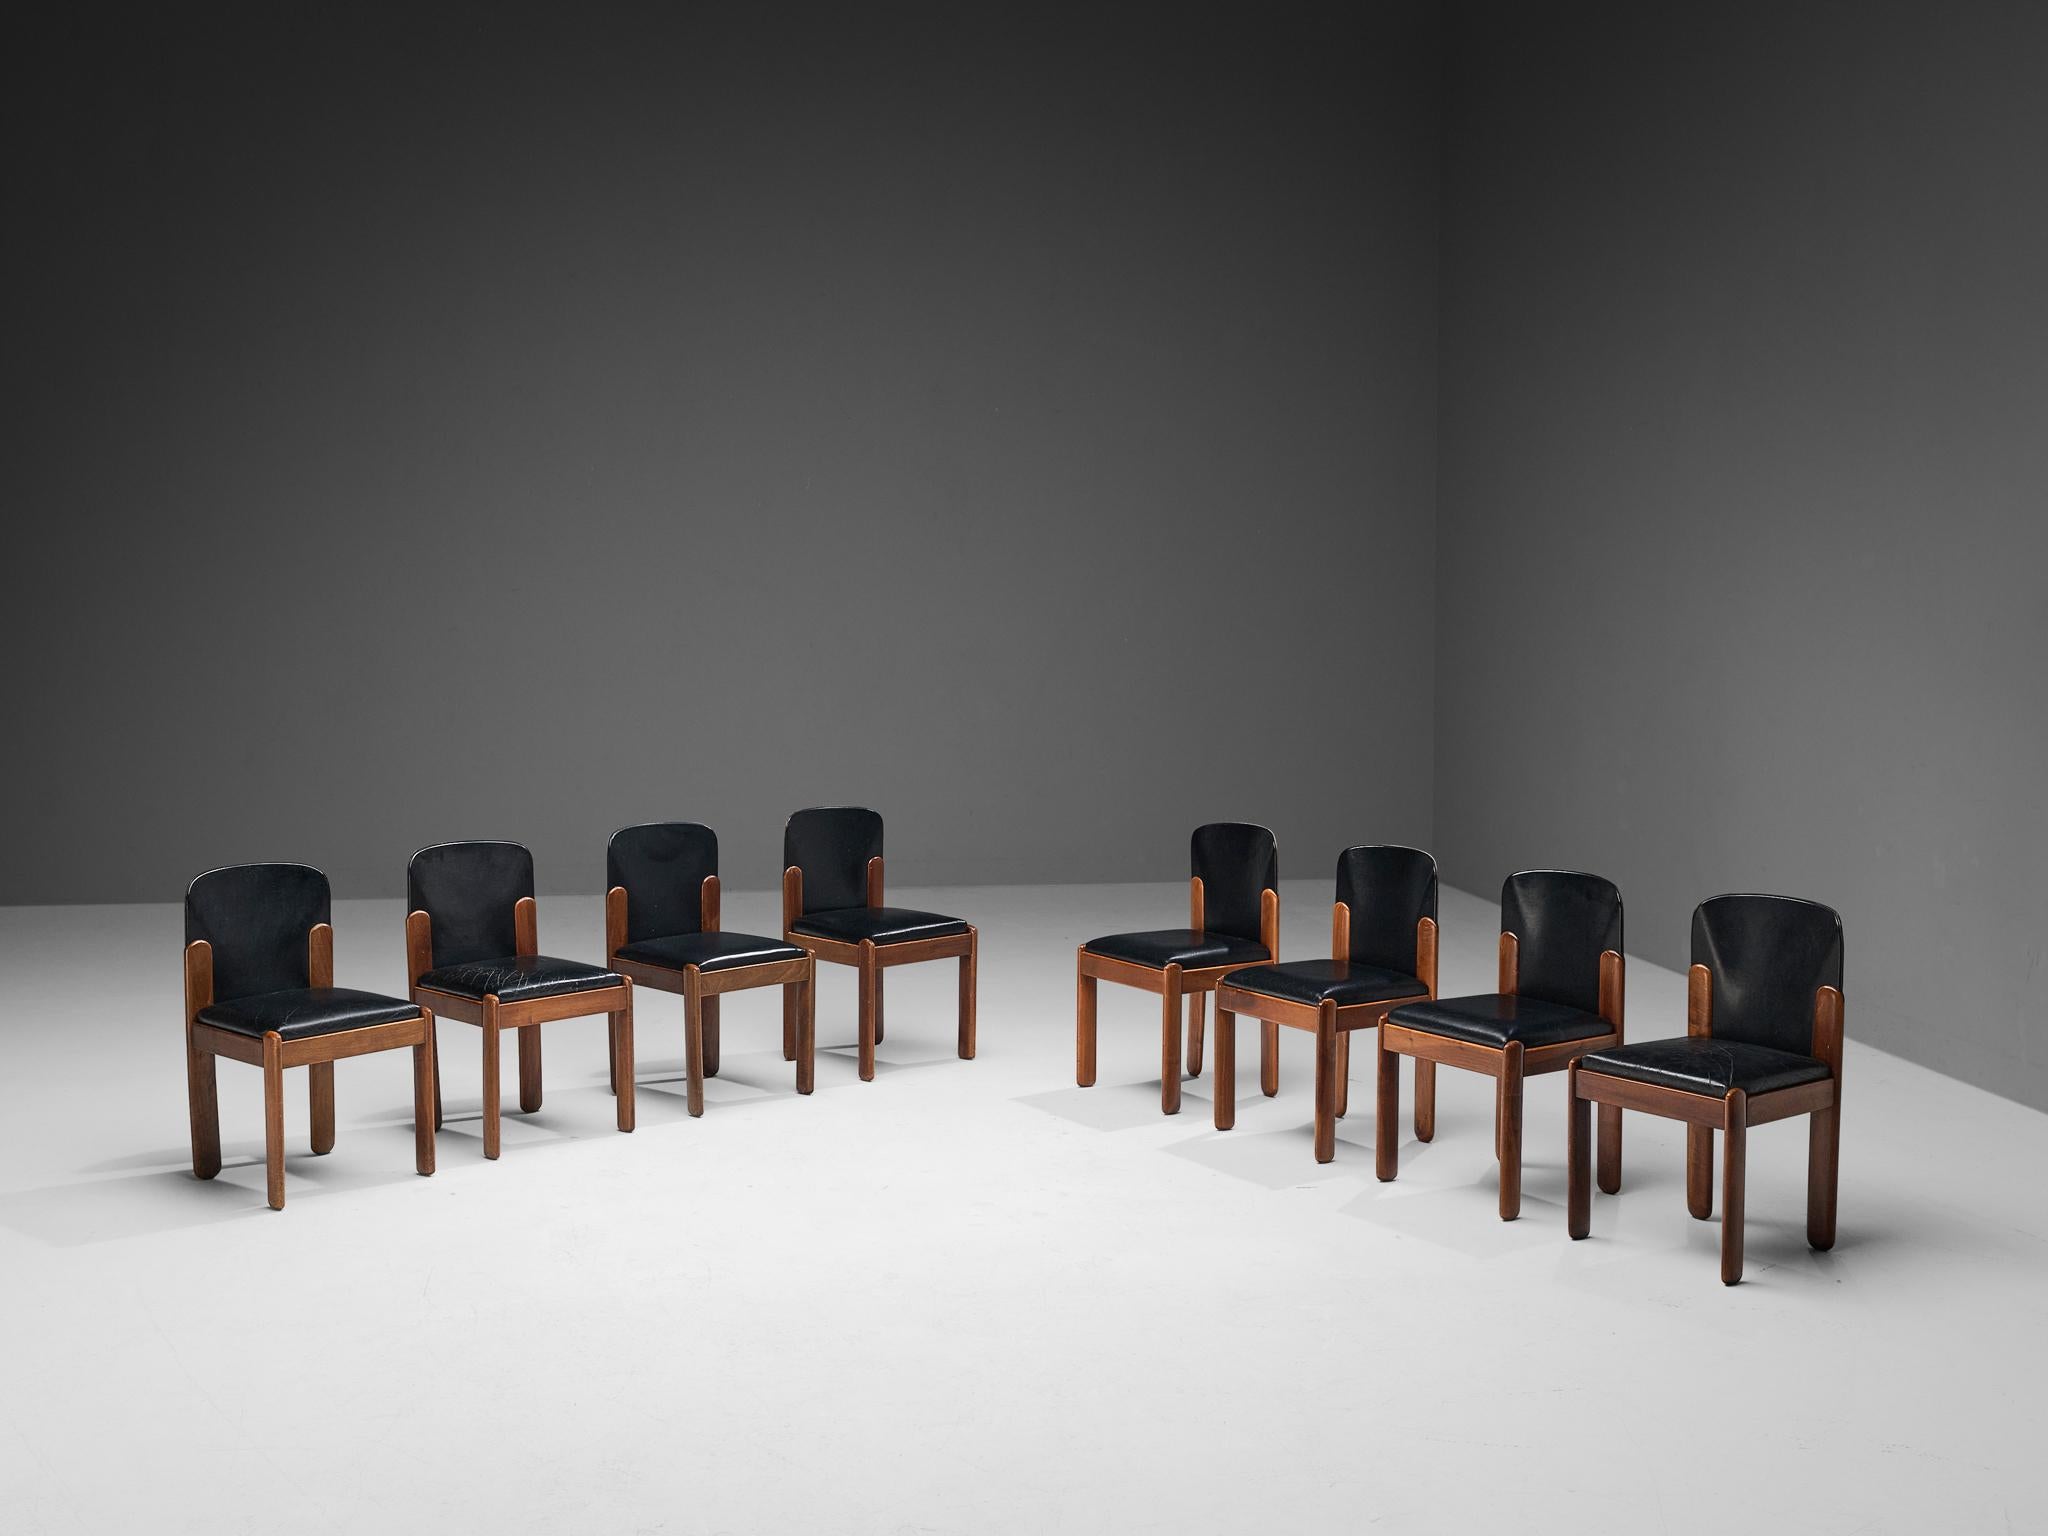 Silvio Coppola for Bernini, set of eight dining chairs model 330, black leather, walnut, Italy, 1960s.

Wonderful set of eight dining chairs by Italian designer Silvio Coppola. These aesthetically well balanced chairs strongly convince with the